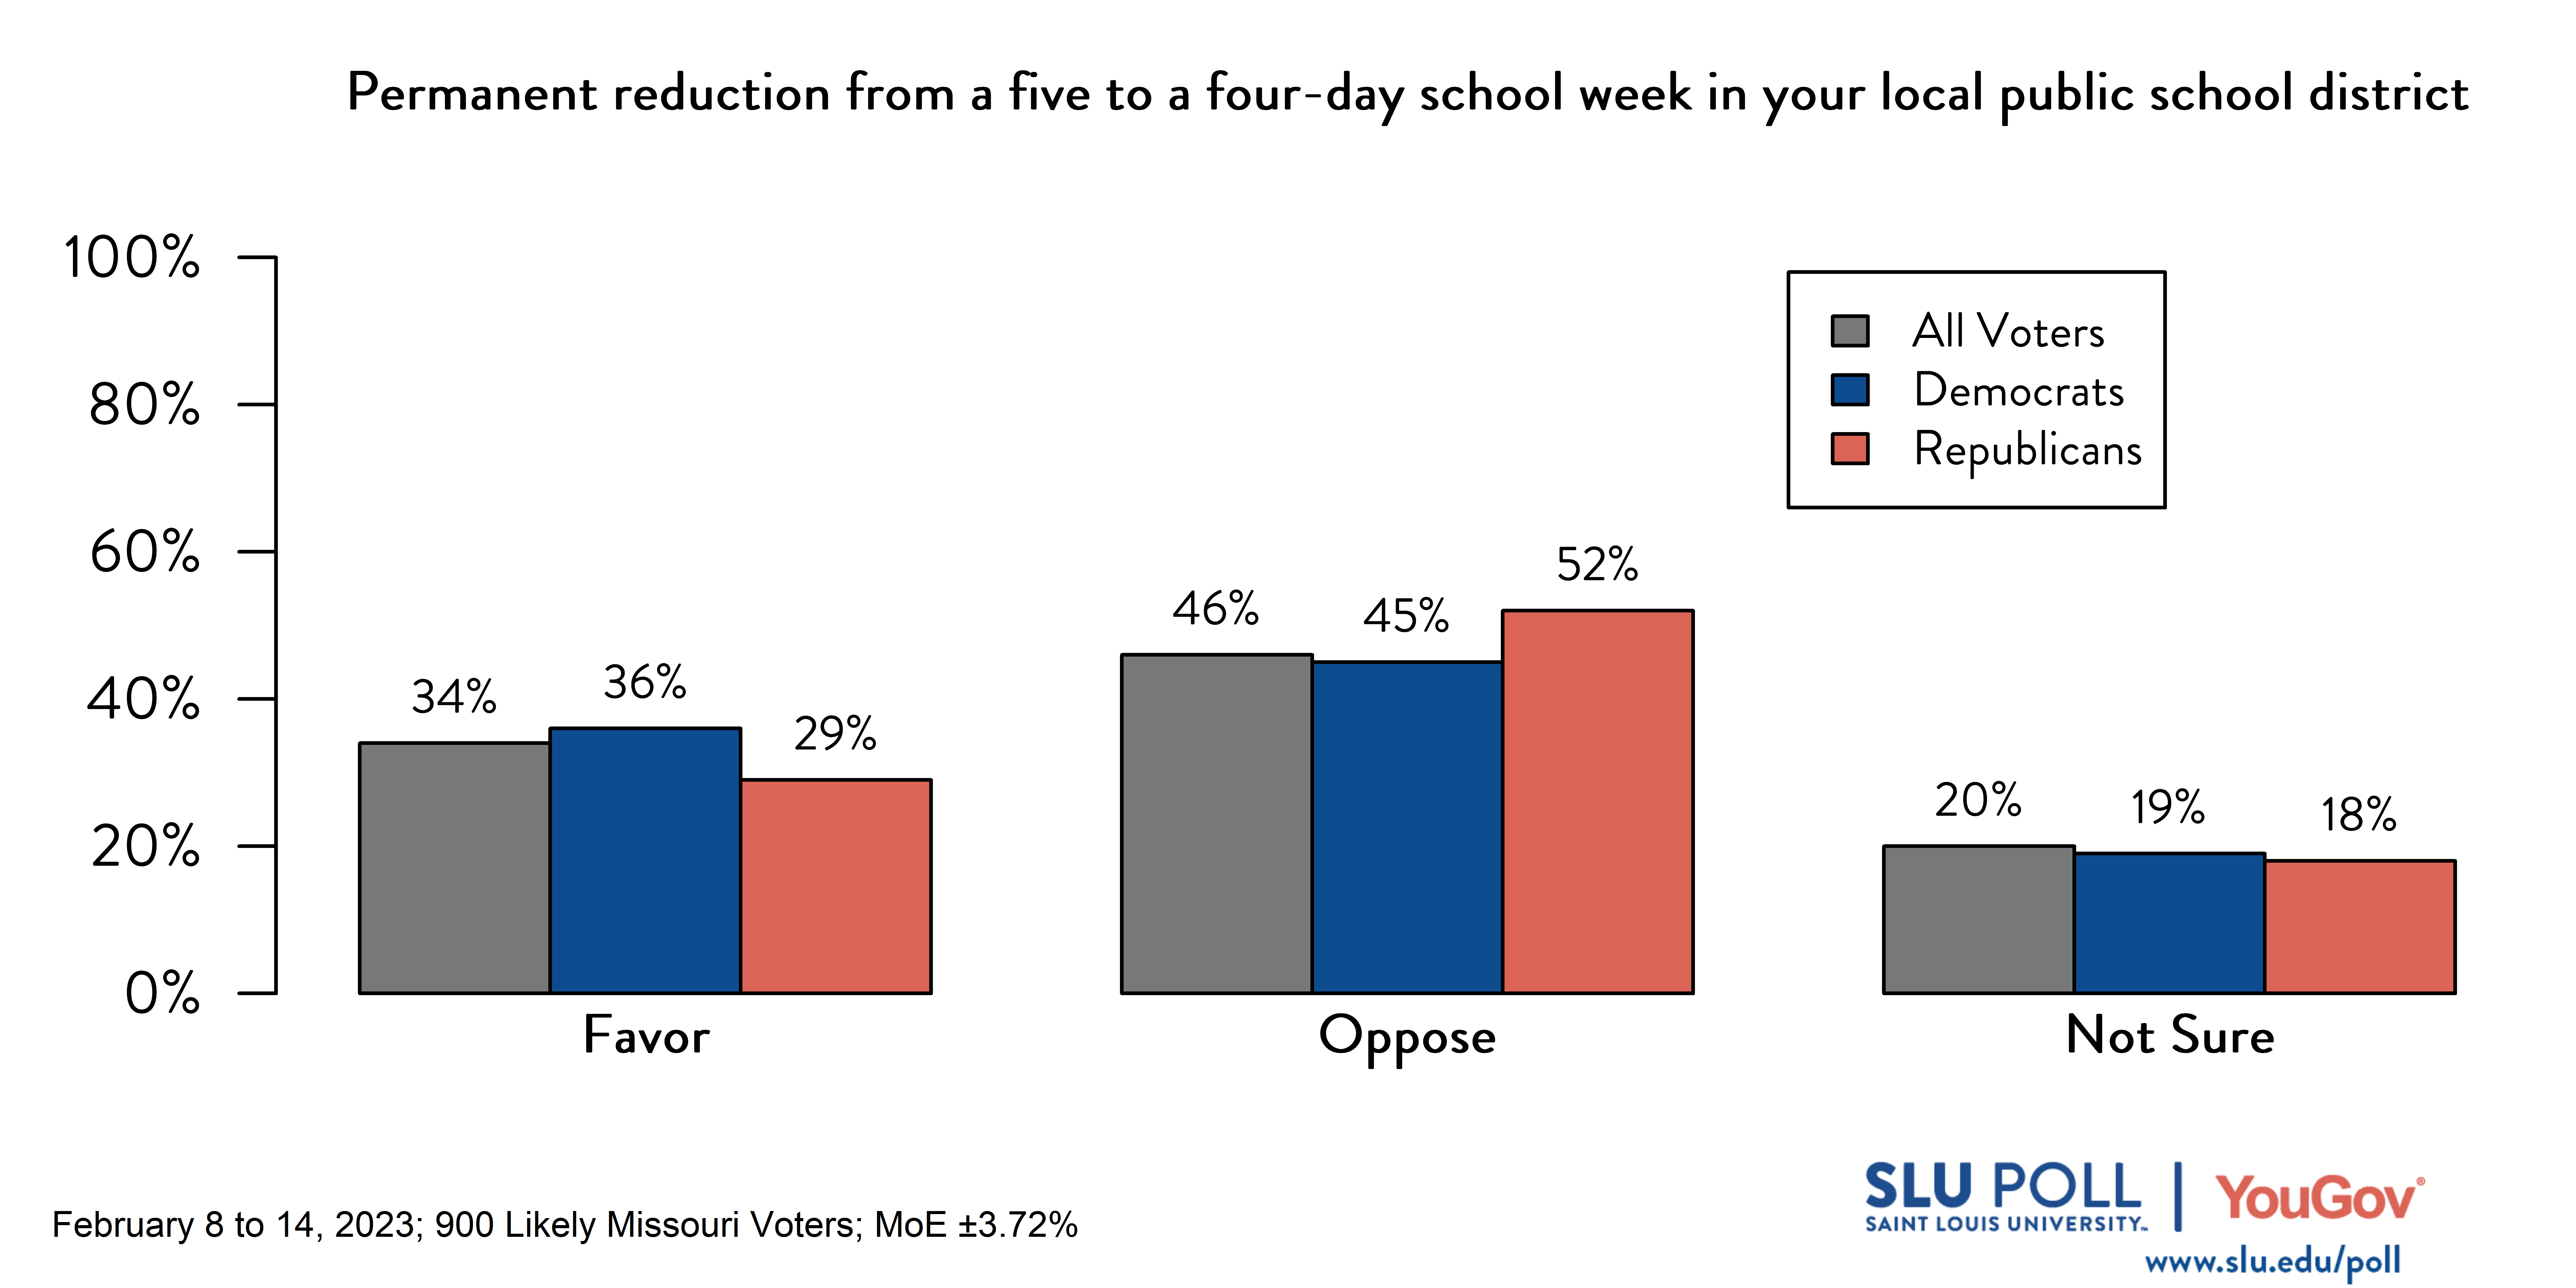 Likely voters' responses to 'Do you favor or oppose the following policies: The permanent reduction from a five to a four-day school week in your local public school district?': 34% Favor, 46% Oppose, and 20% Not sure. Democratic voters' responses: ' 36% Favor, 45% Oppose, and 19% Not sure. Republican voters' responses: 29% Favor, 52% Oppose, and 18% Not sure.